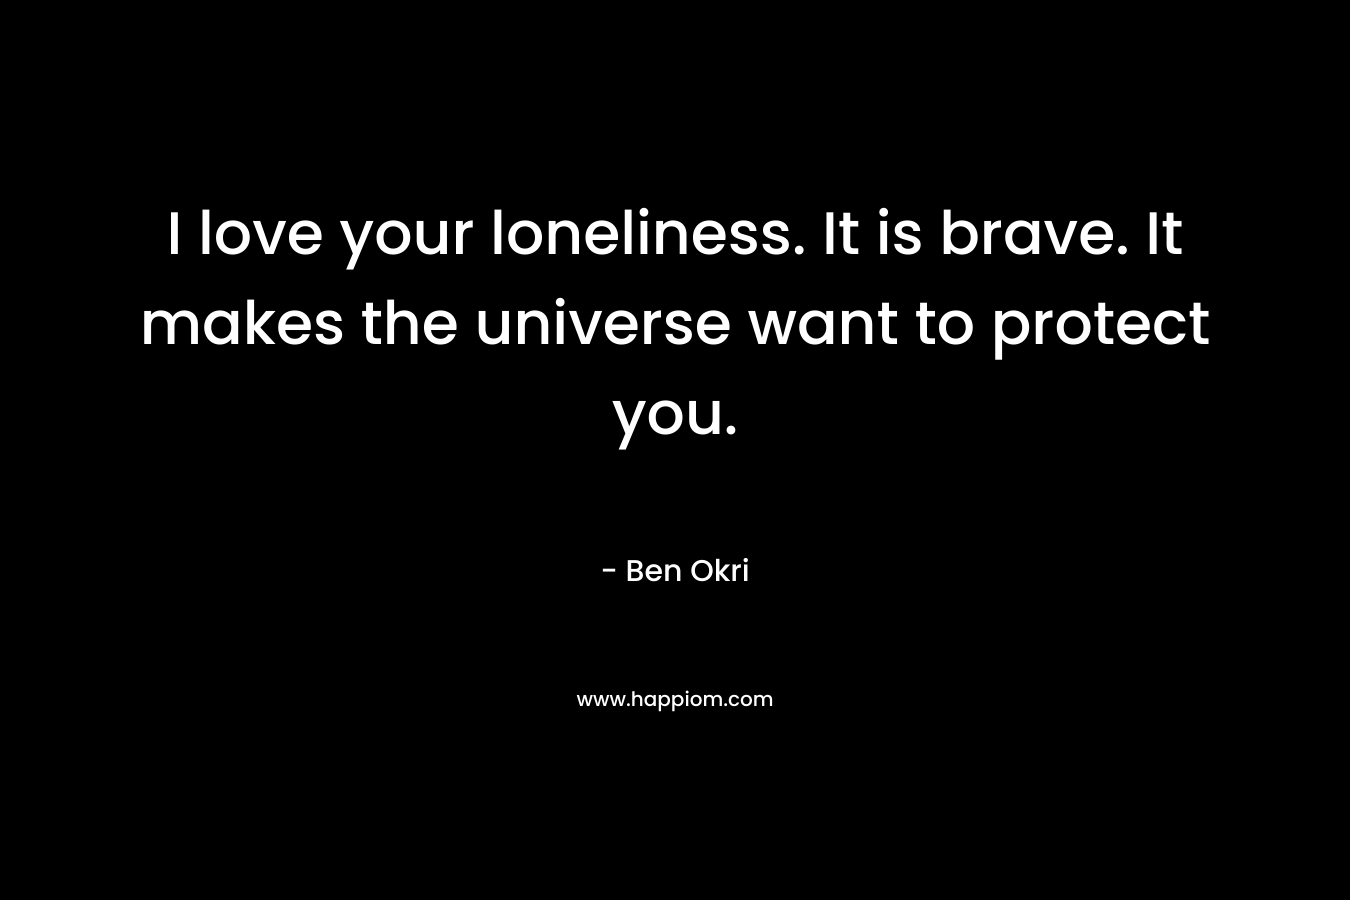 I love your loneliness. It is brave. It makes the universe want to protect you. – Ben Okri